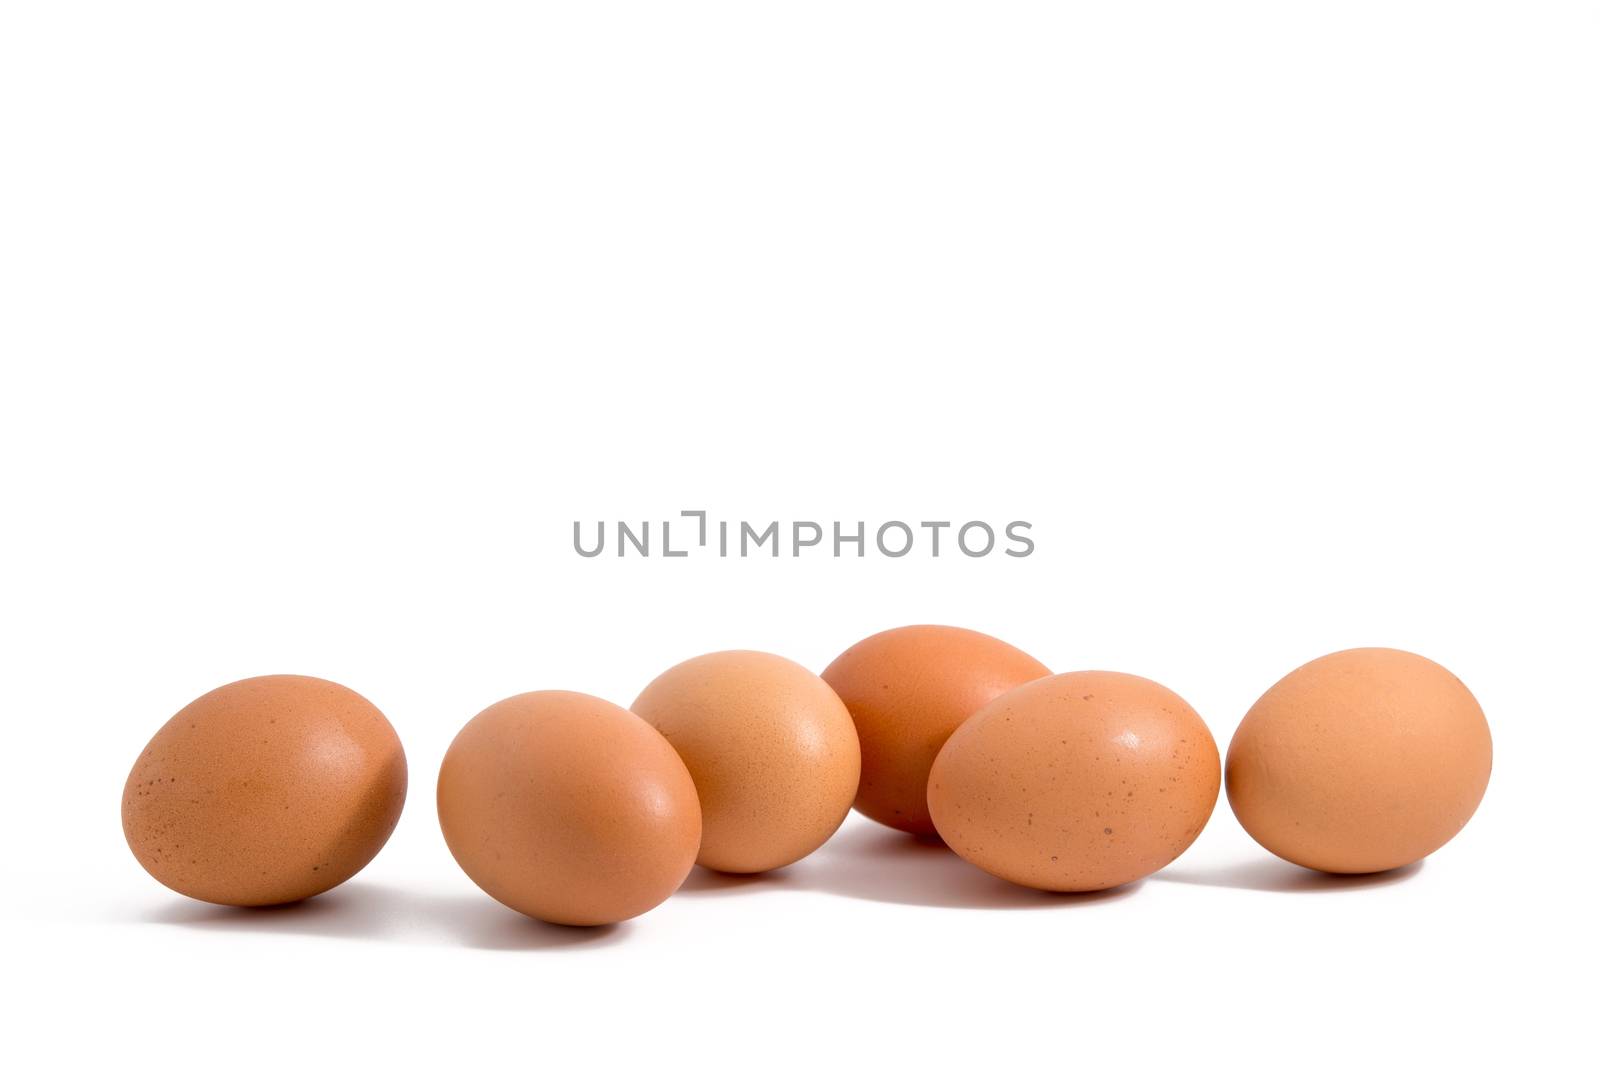 six eggs in a row on white background